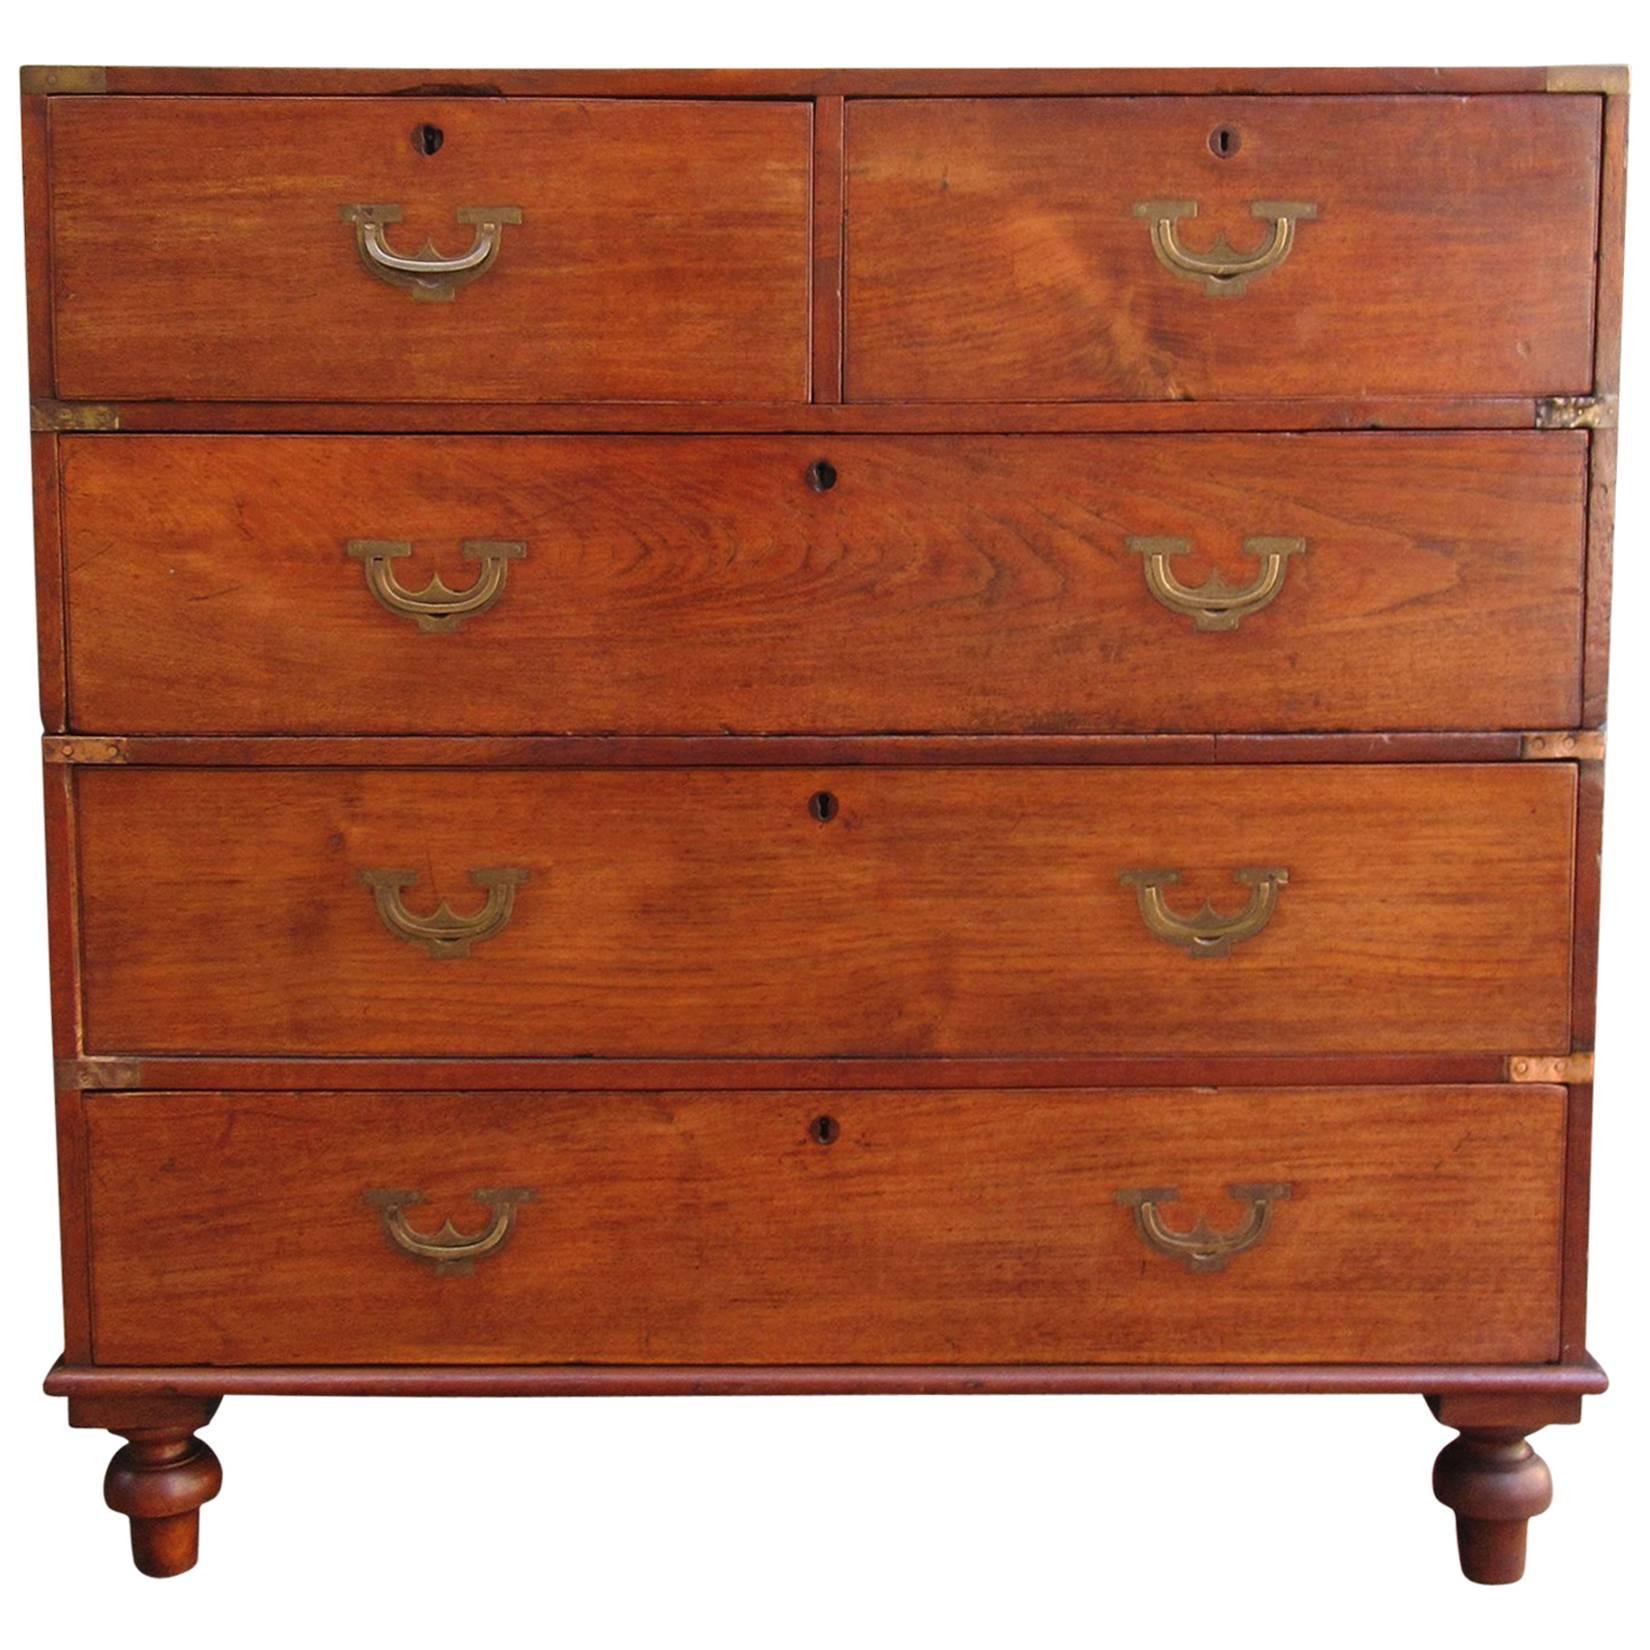 19th Century English Campaign Mahogany Chest of Drawers